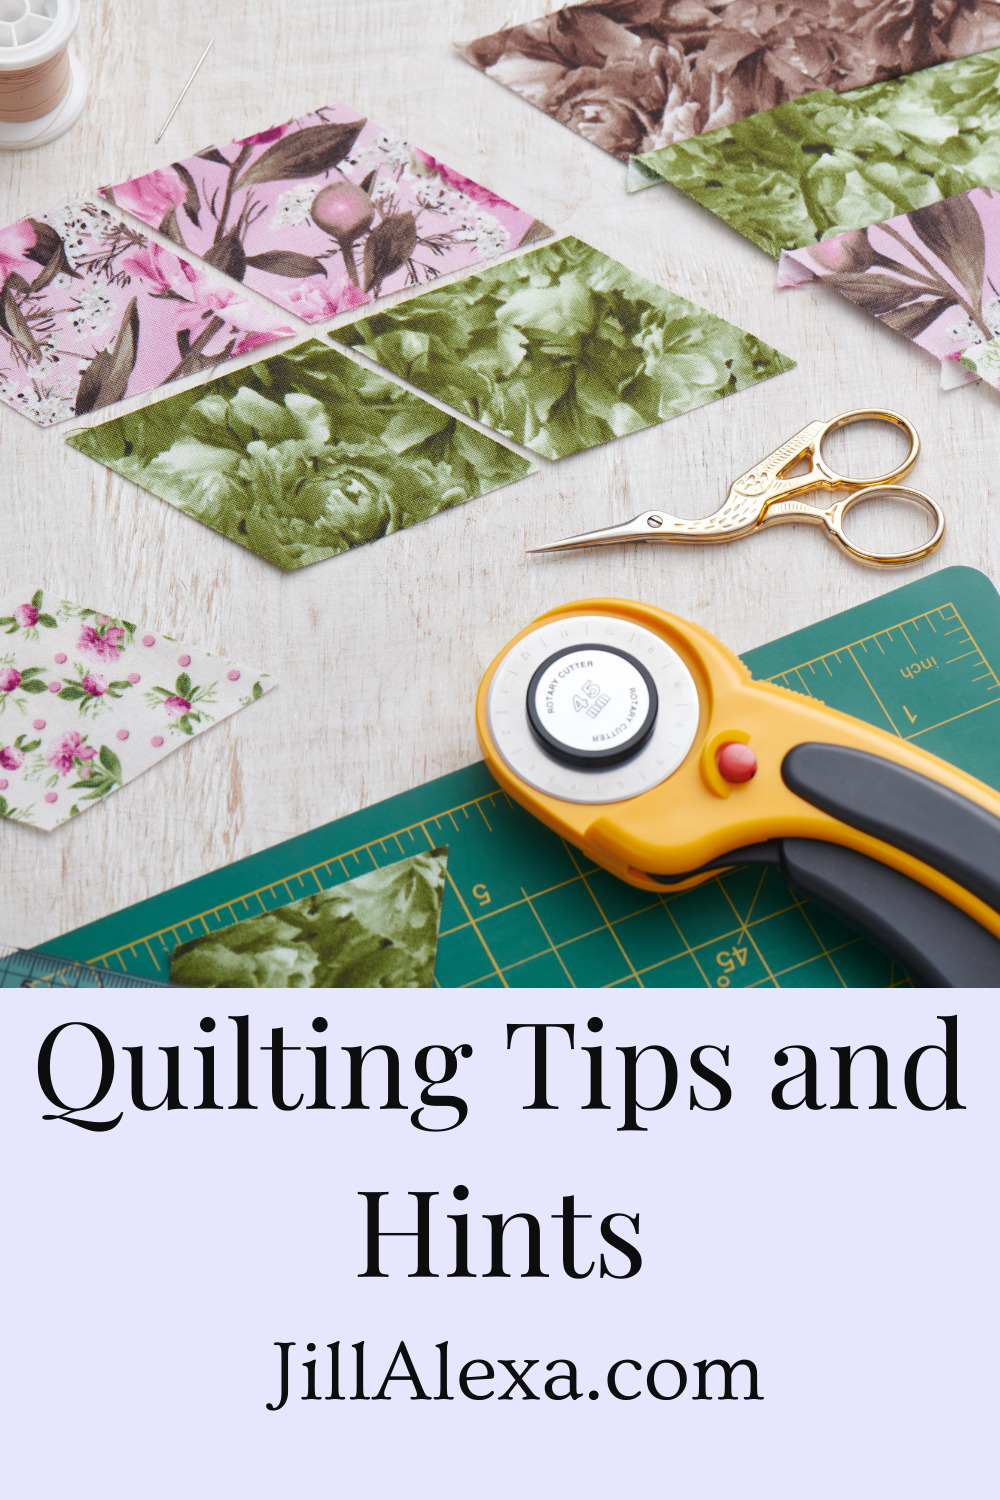 Quilting Tips and Hints - tips and hints that might make this exciting journey of quilting easier for people just starting out on this exciting new journey.